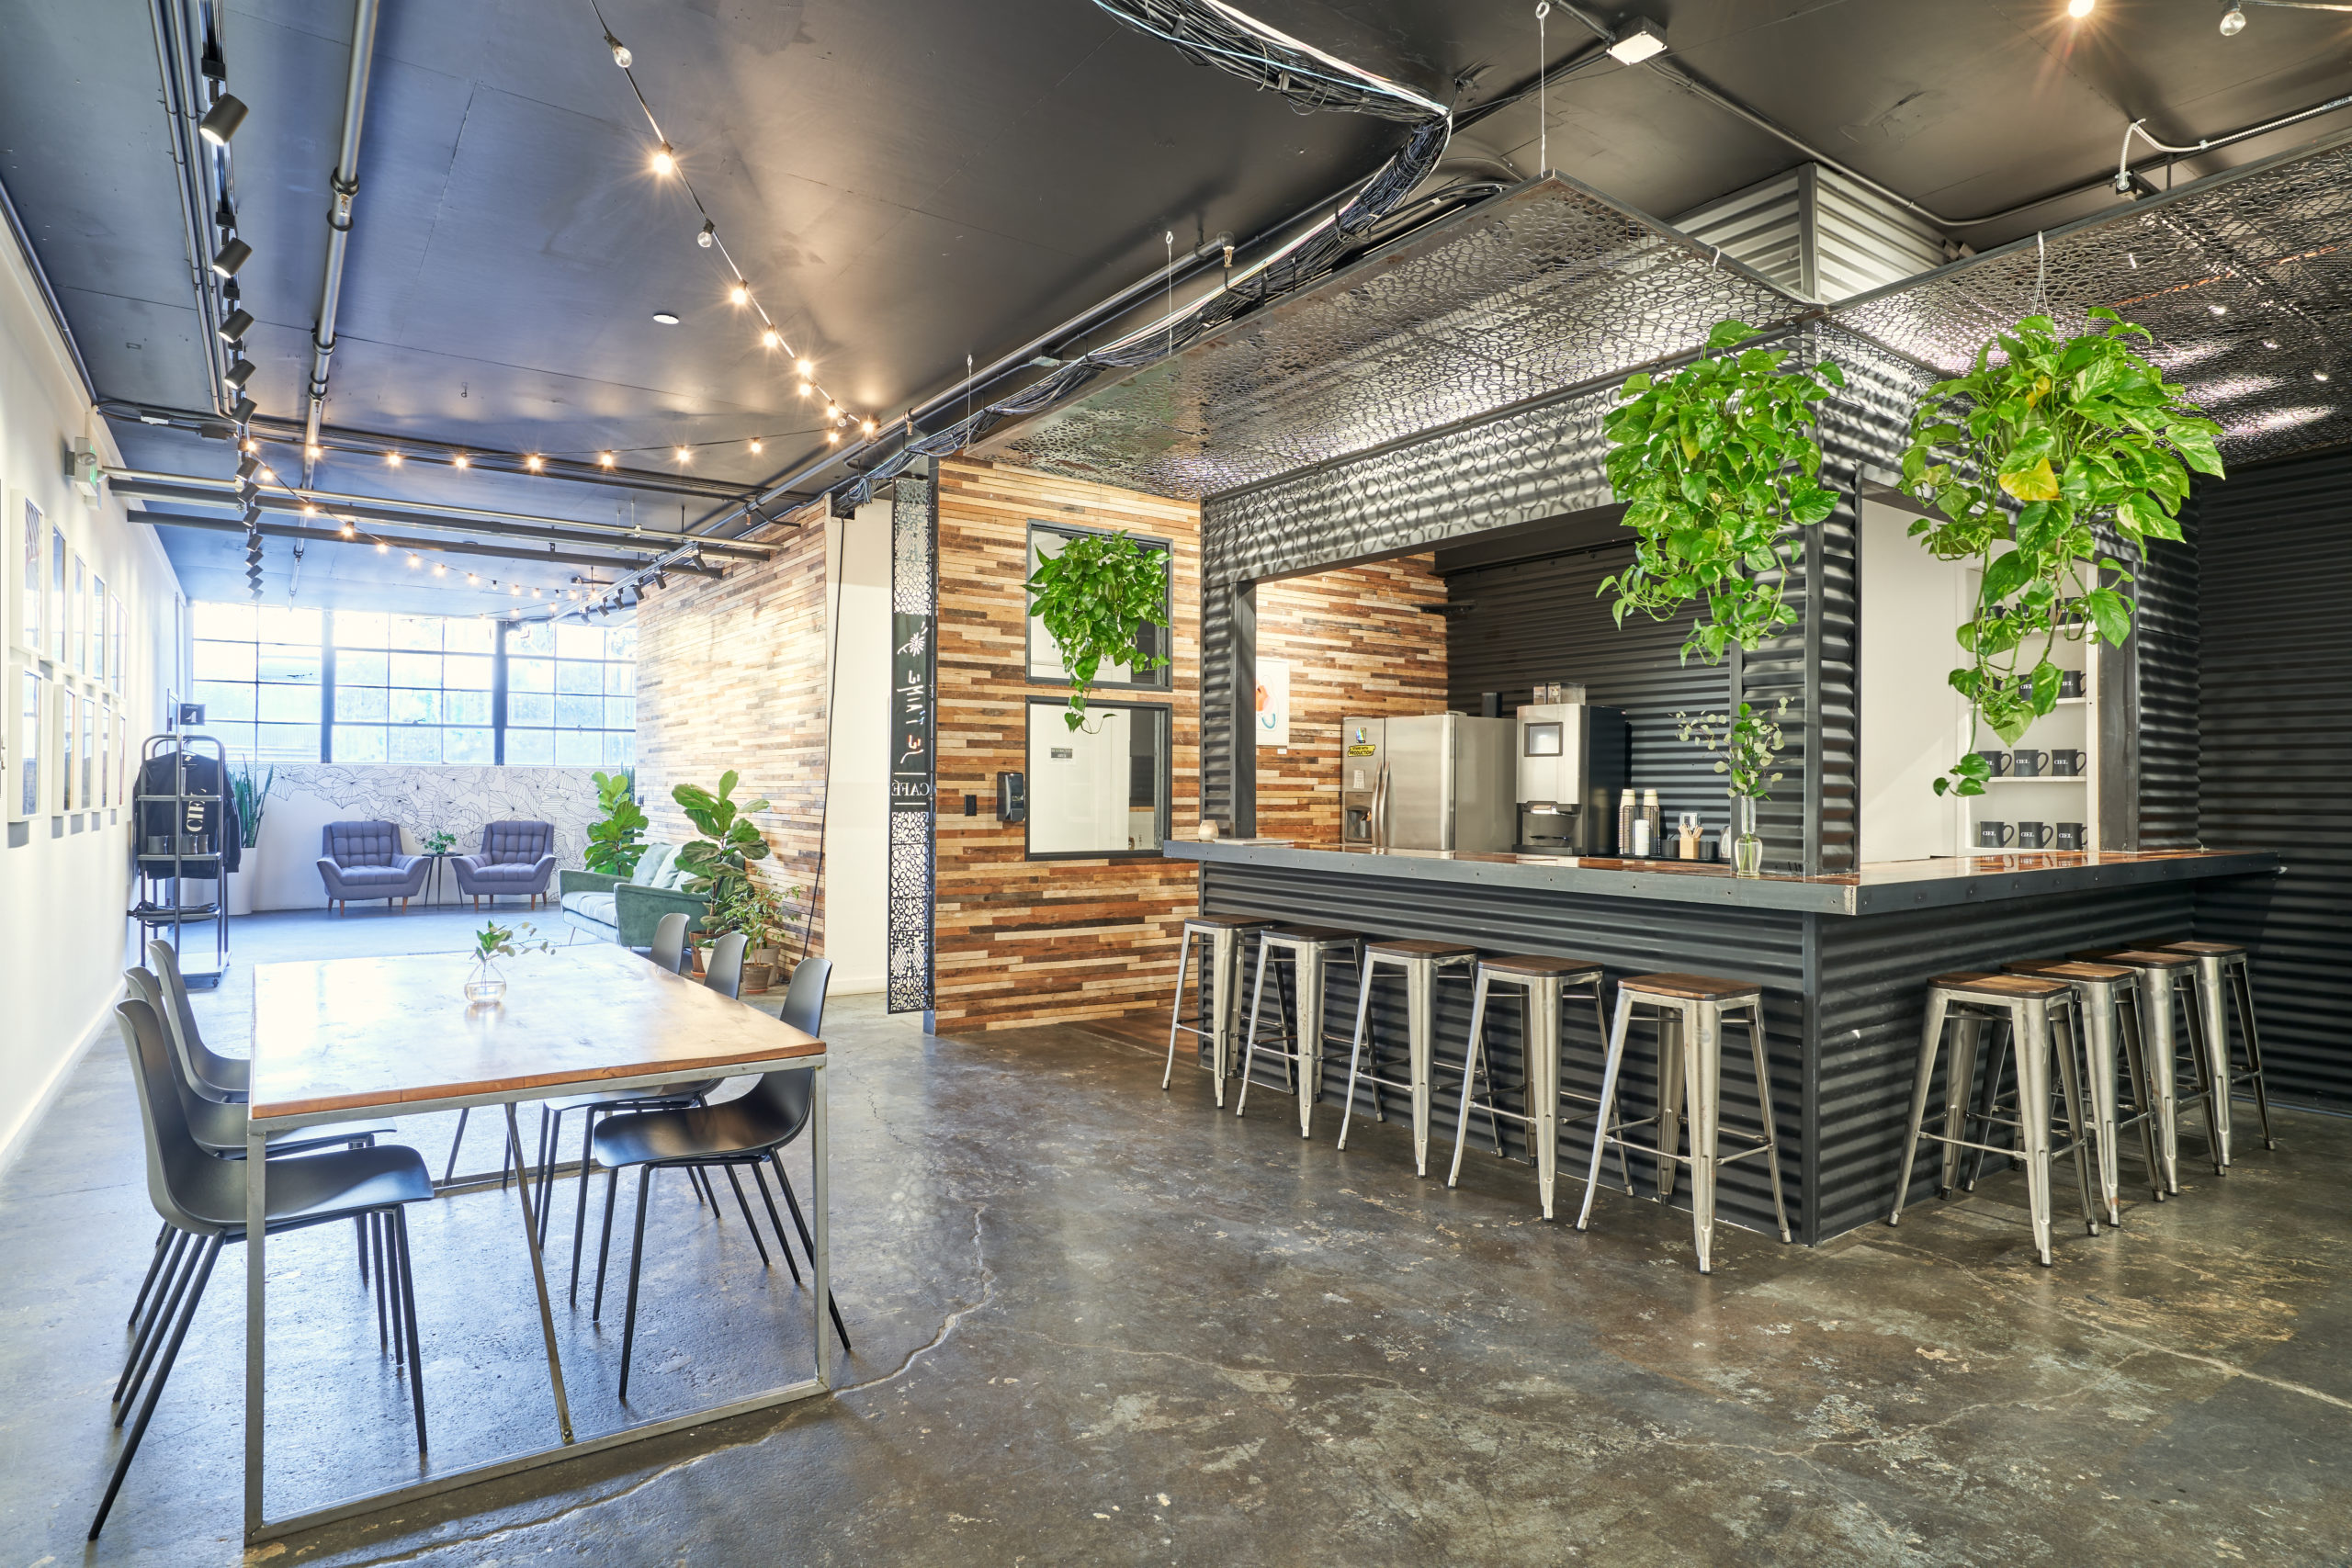 View into the cafe which features a small table, a spacious kitchen with seating at the bar, two chairs, and a small sofa. Green plants along hang around the bar area and add botanical beauty to the best shared offices Berkeley has.